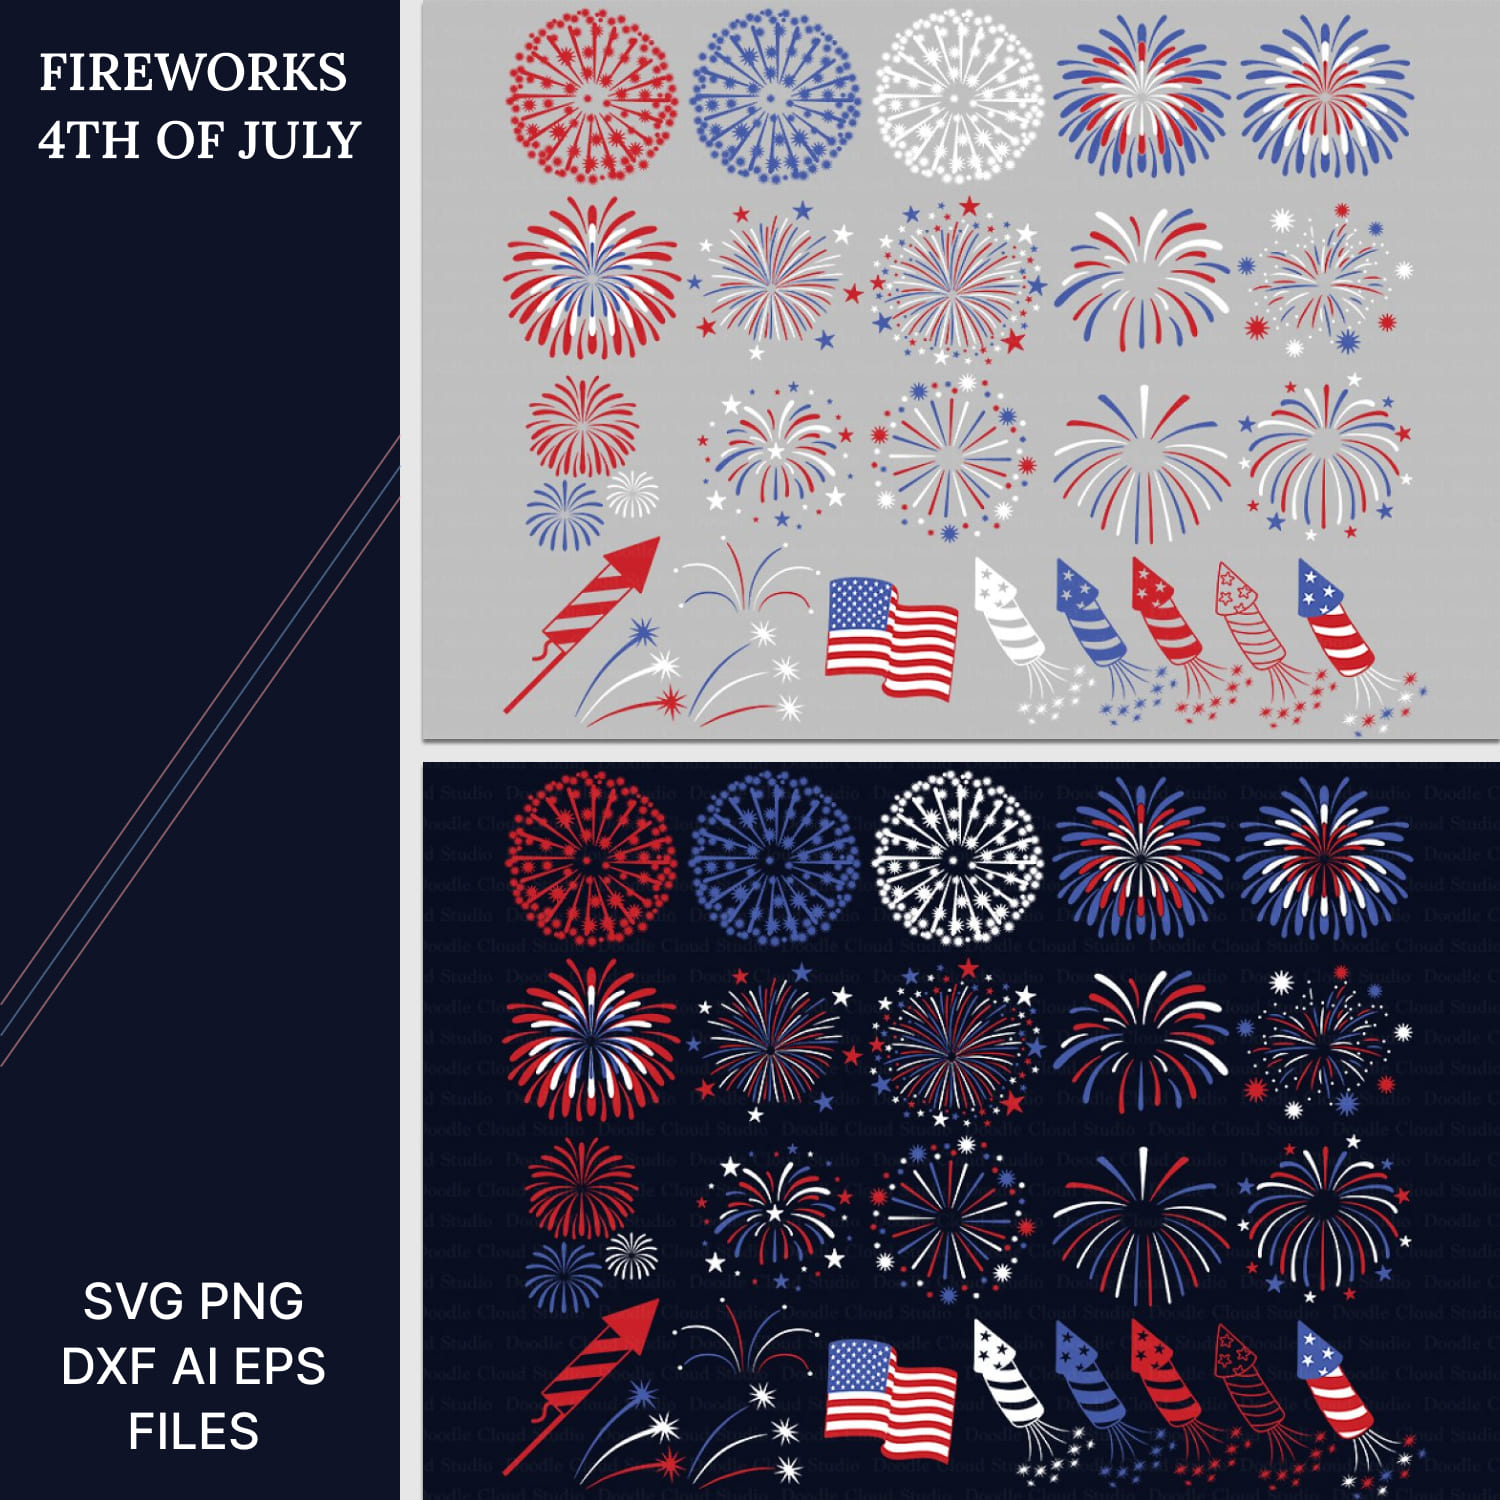 Fireworks SVG, 4th of July SVG - main image preview.